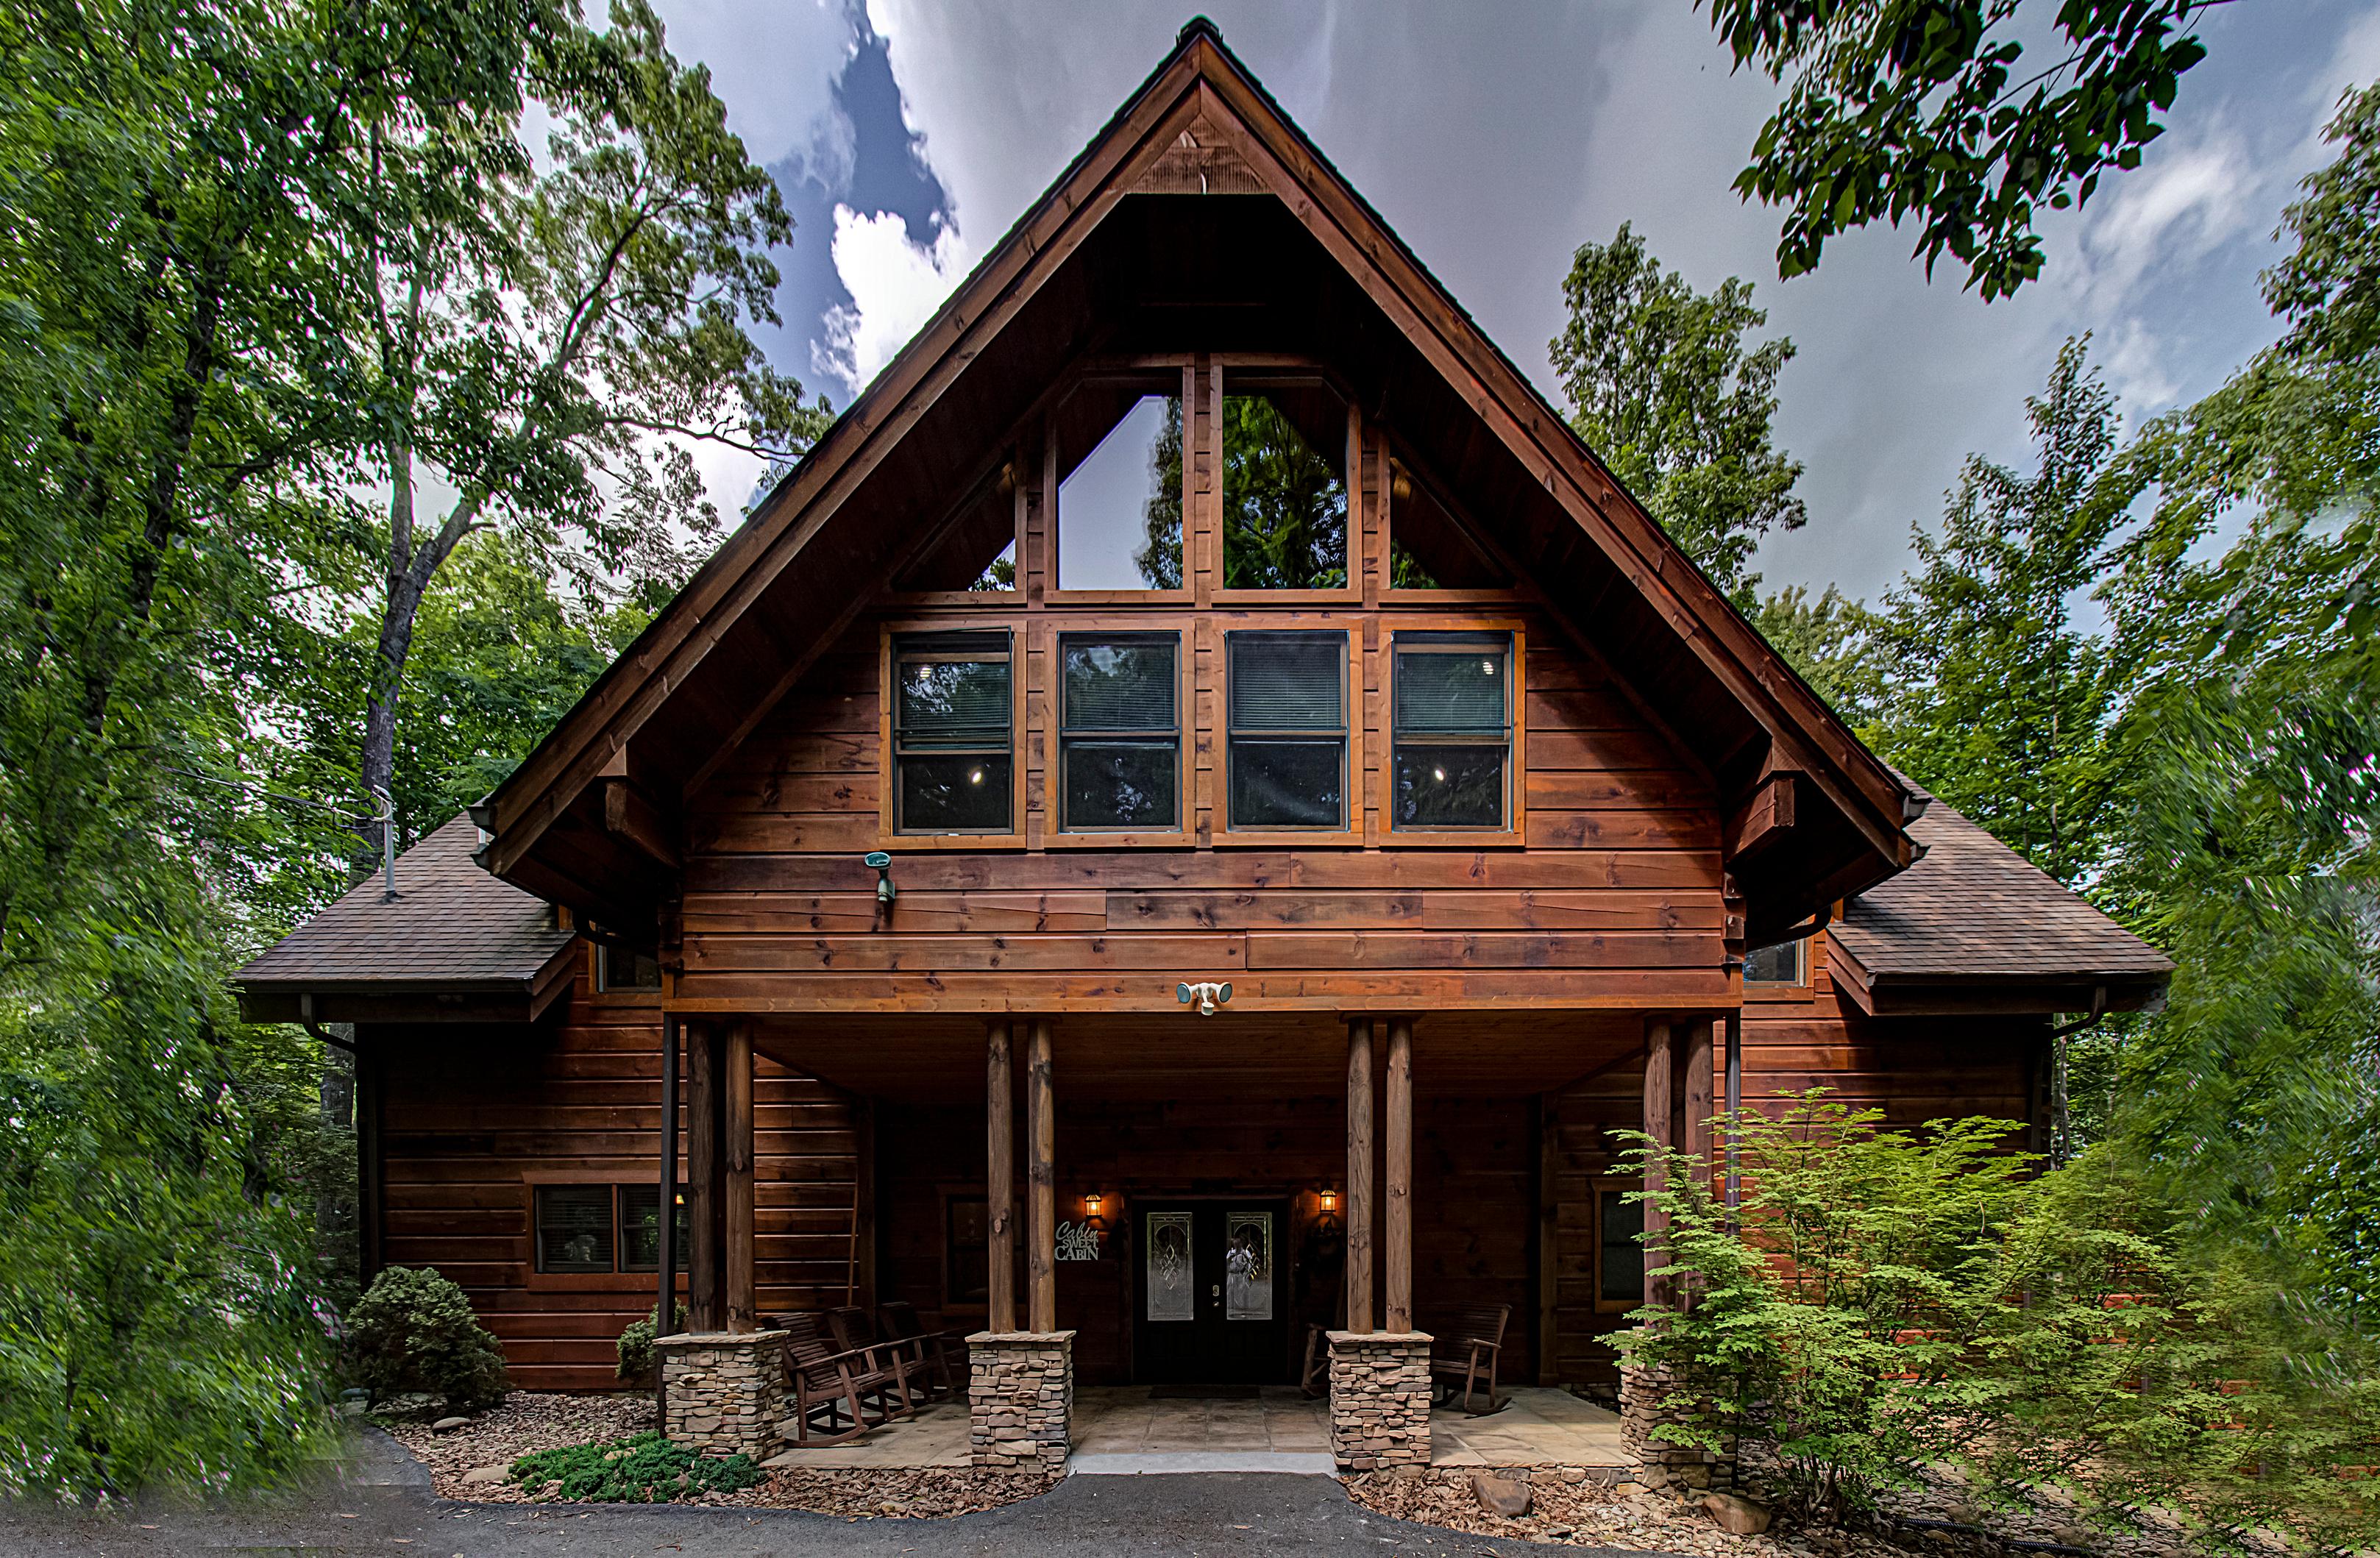 Arrowhead is spacious five bedroom cabin located on five acres just minutes from Downtown Gatlinburg